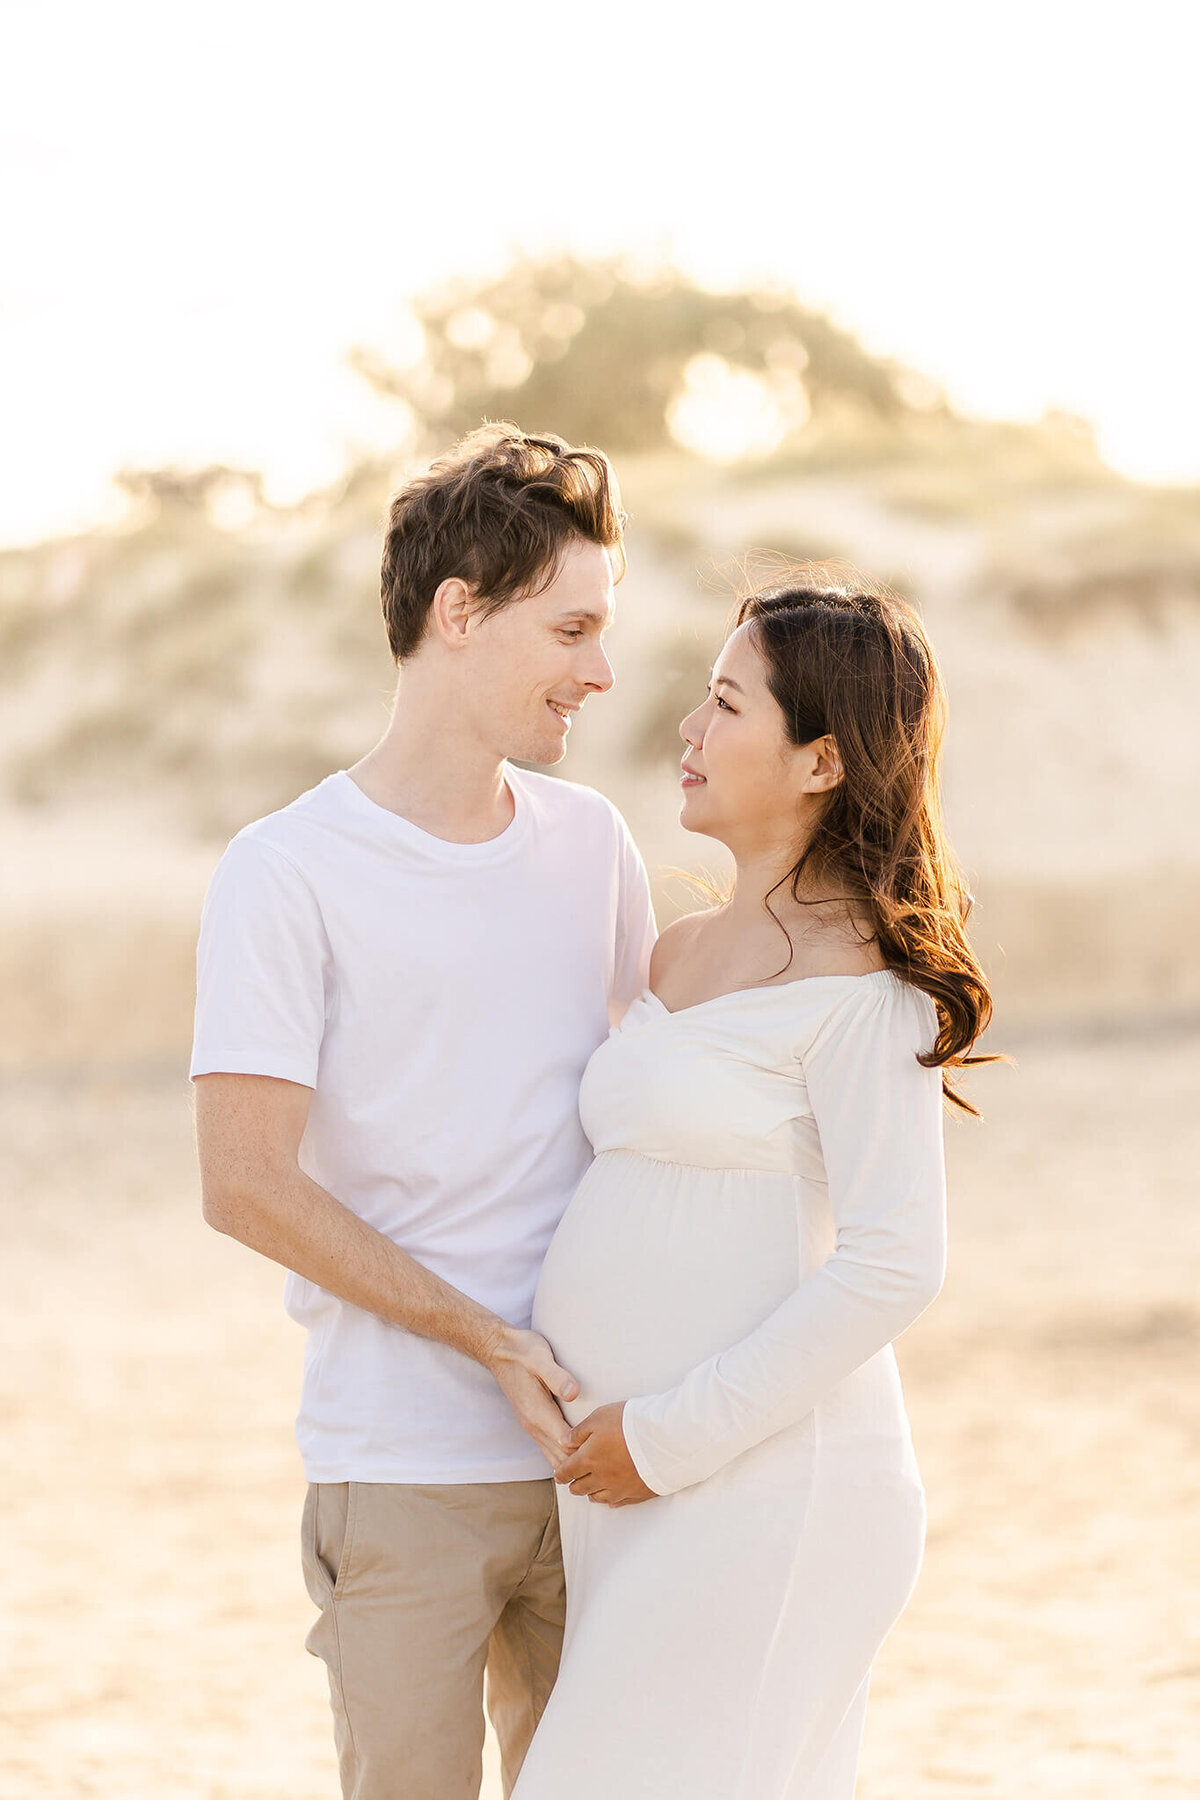 Cute couple sharing intimate look during maternity photoshoot in Gold Coast QLD